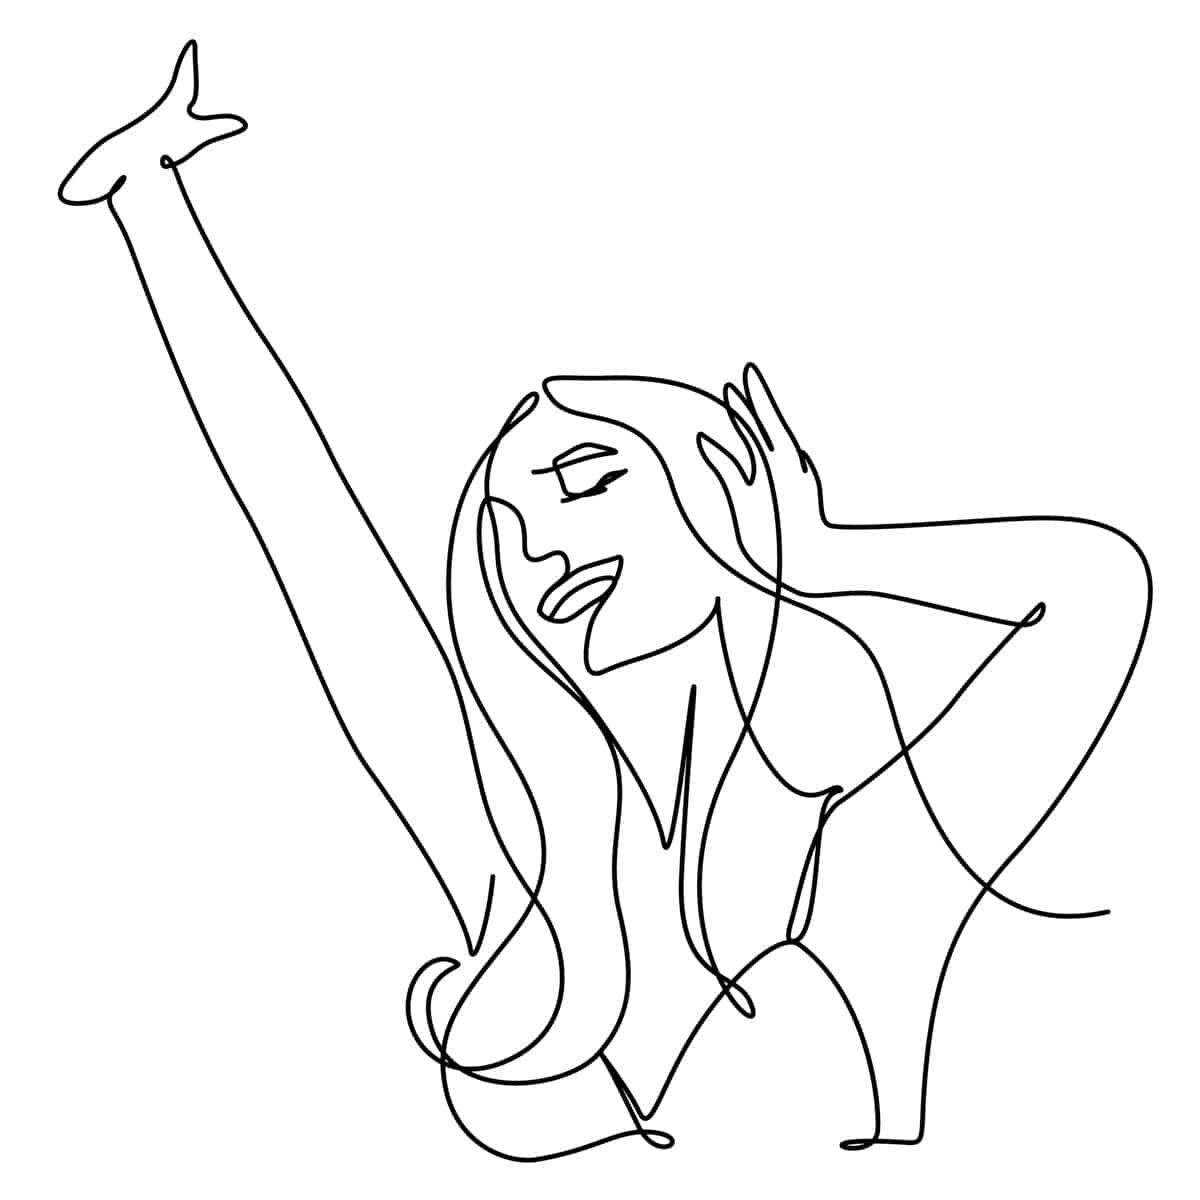 Stylized continuous line drawing of woman.